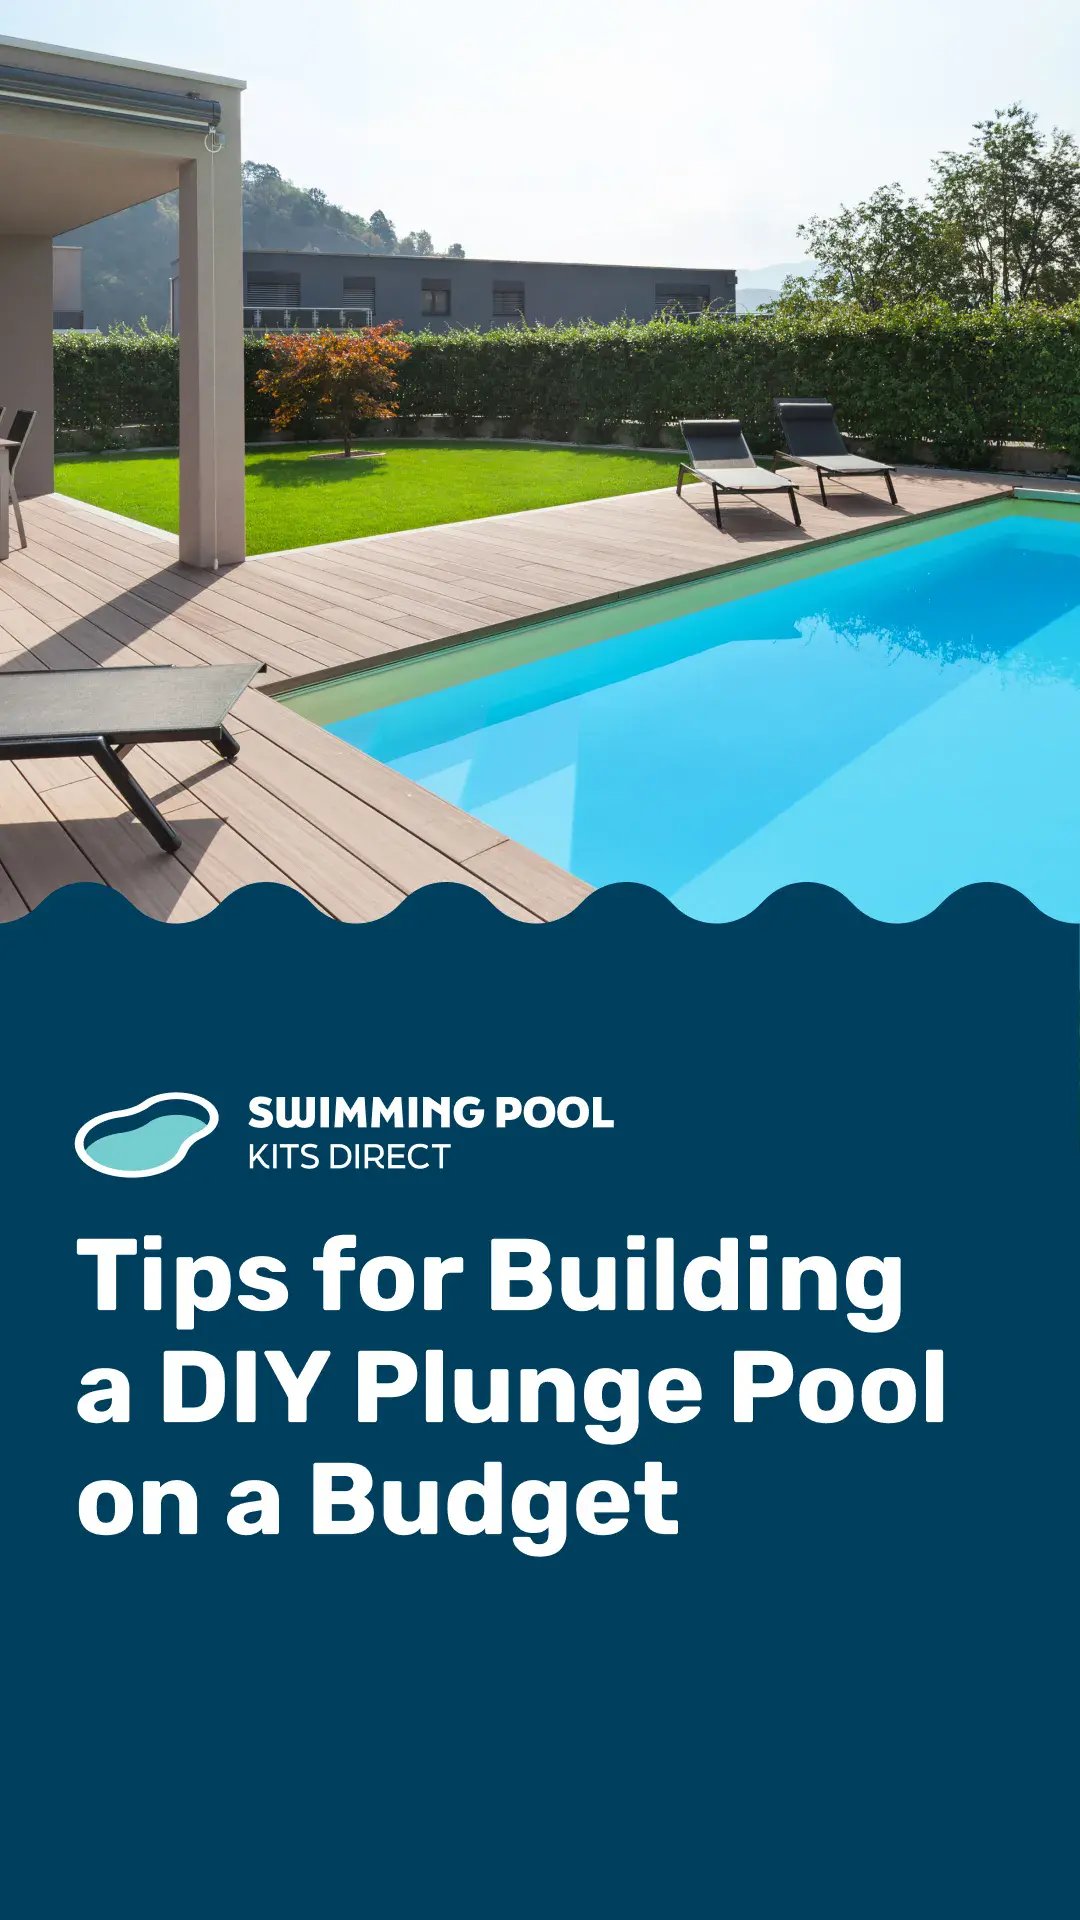 Cover - Tips for Building a DIY Plunge Pool on a Budget